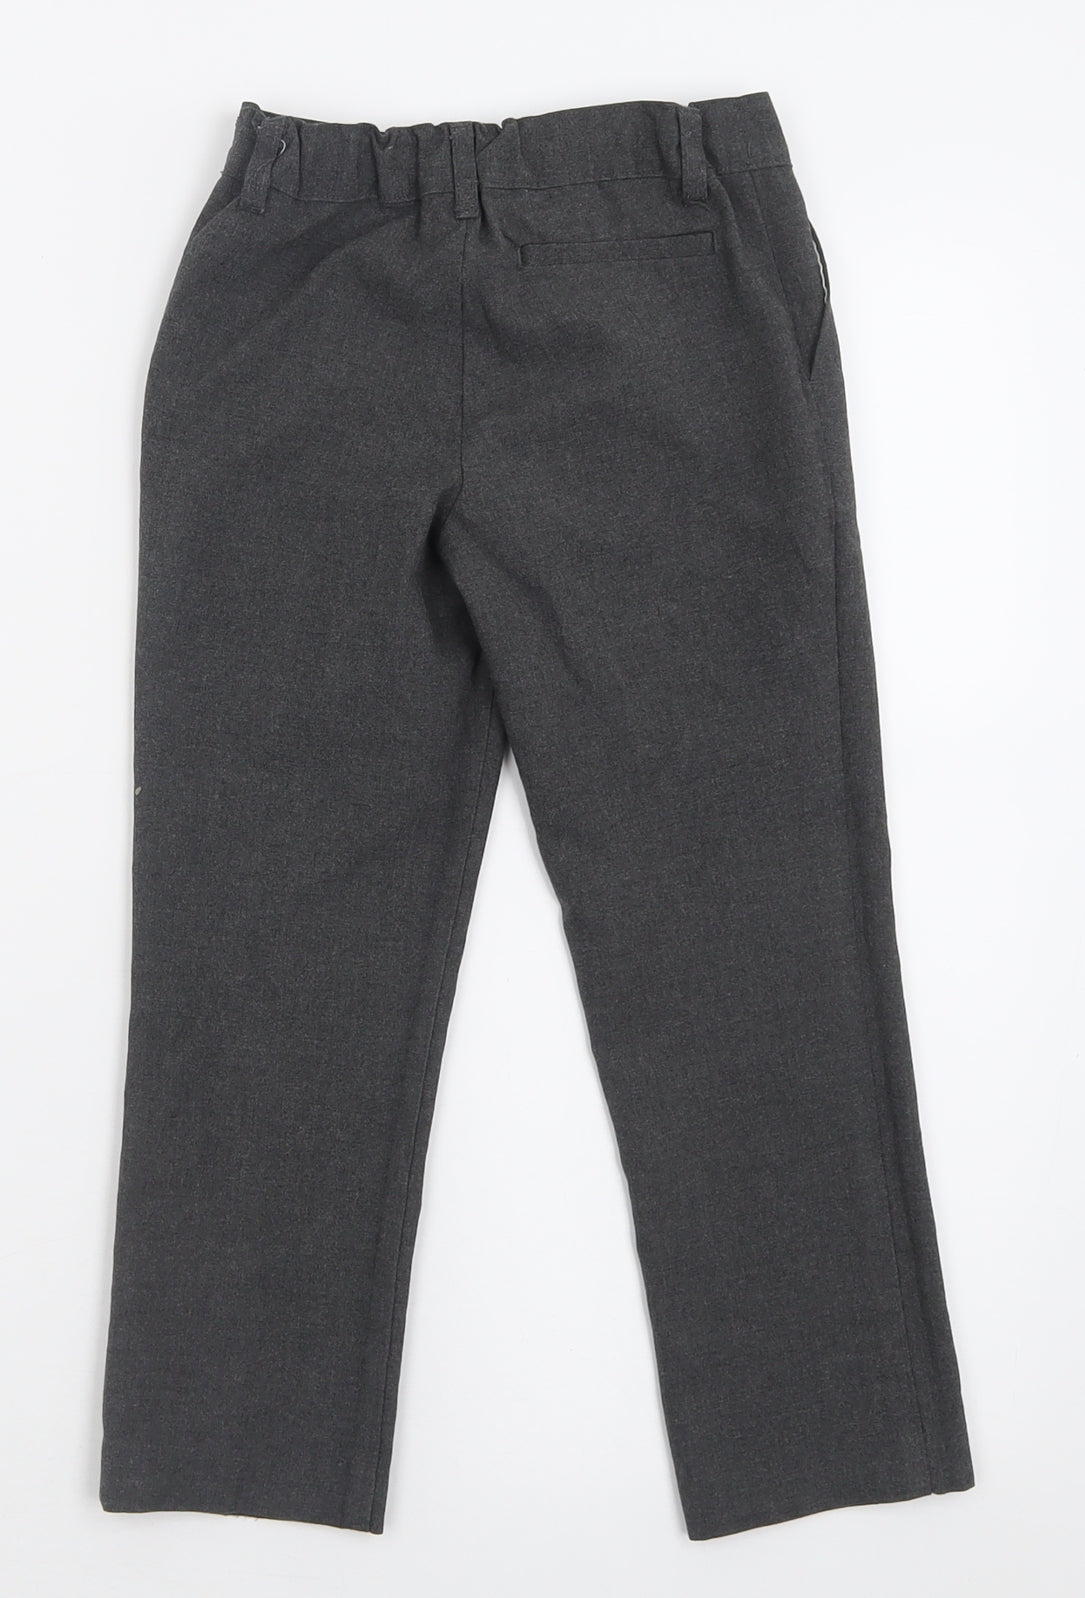 Marks and Spencer Boys Grey  Polyester Capri Trousers Size 4-5 Years  Regular Pullover - School Wear